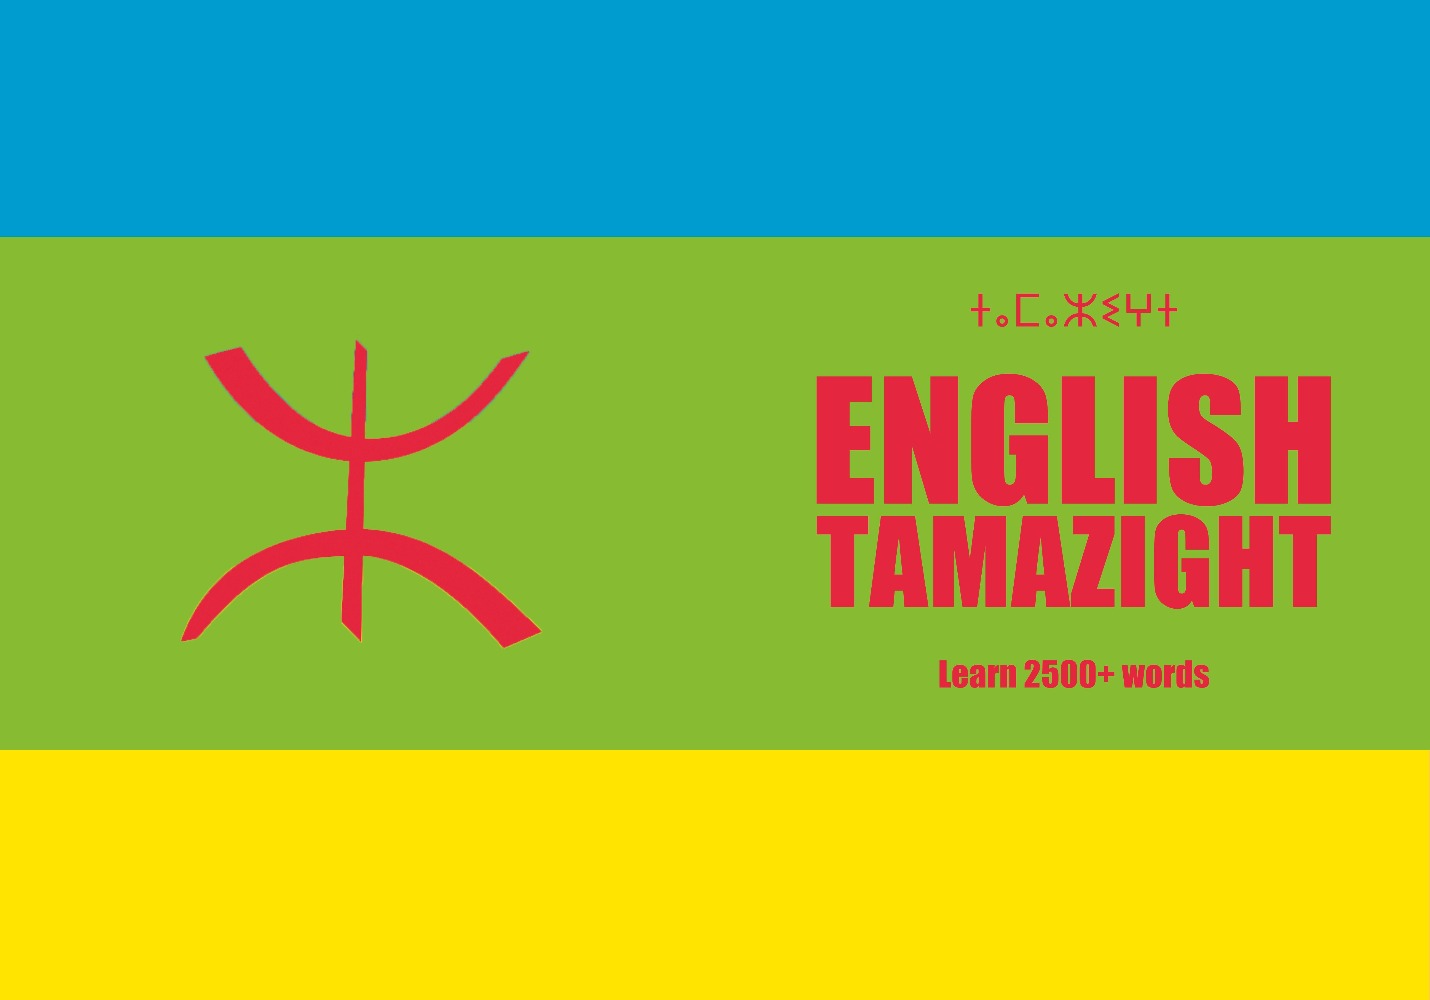 Tamazight language learning notebook cover